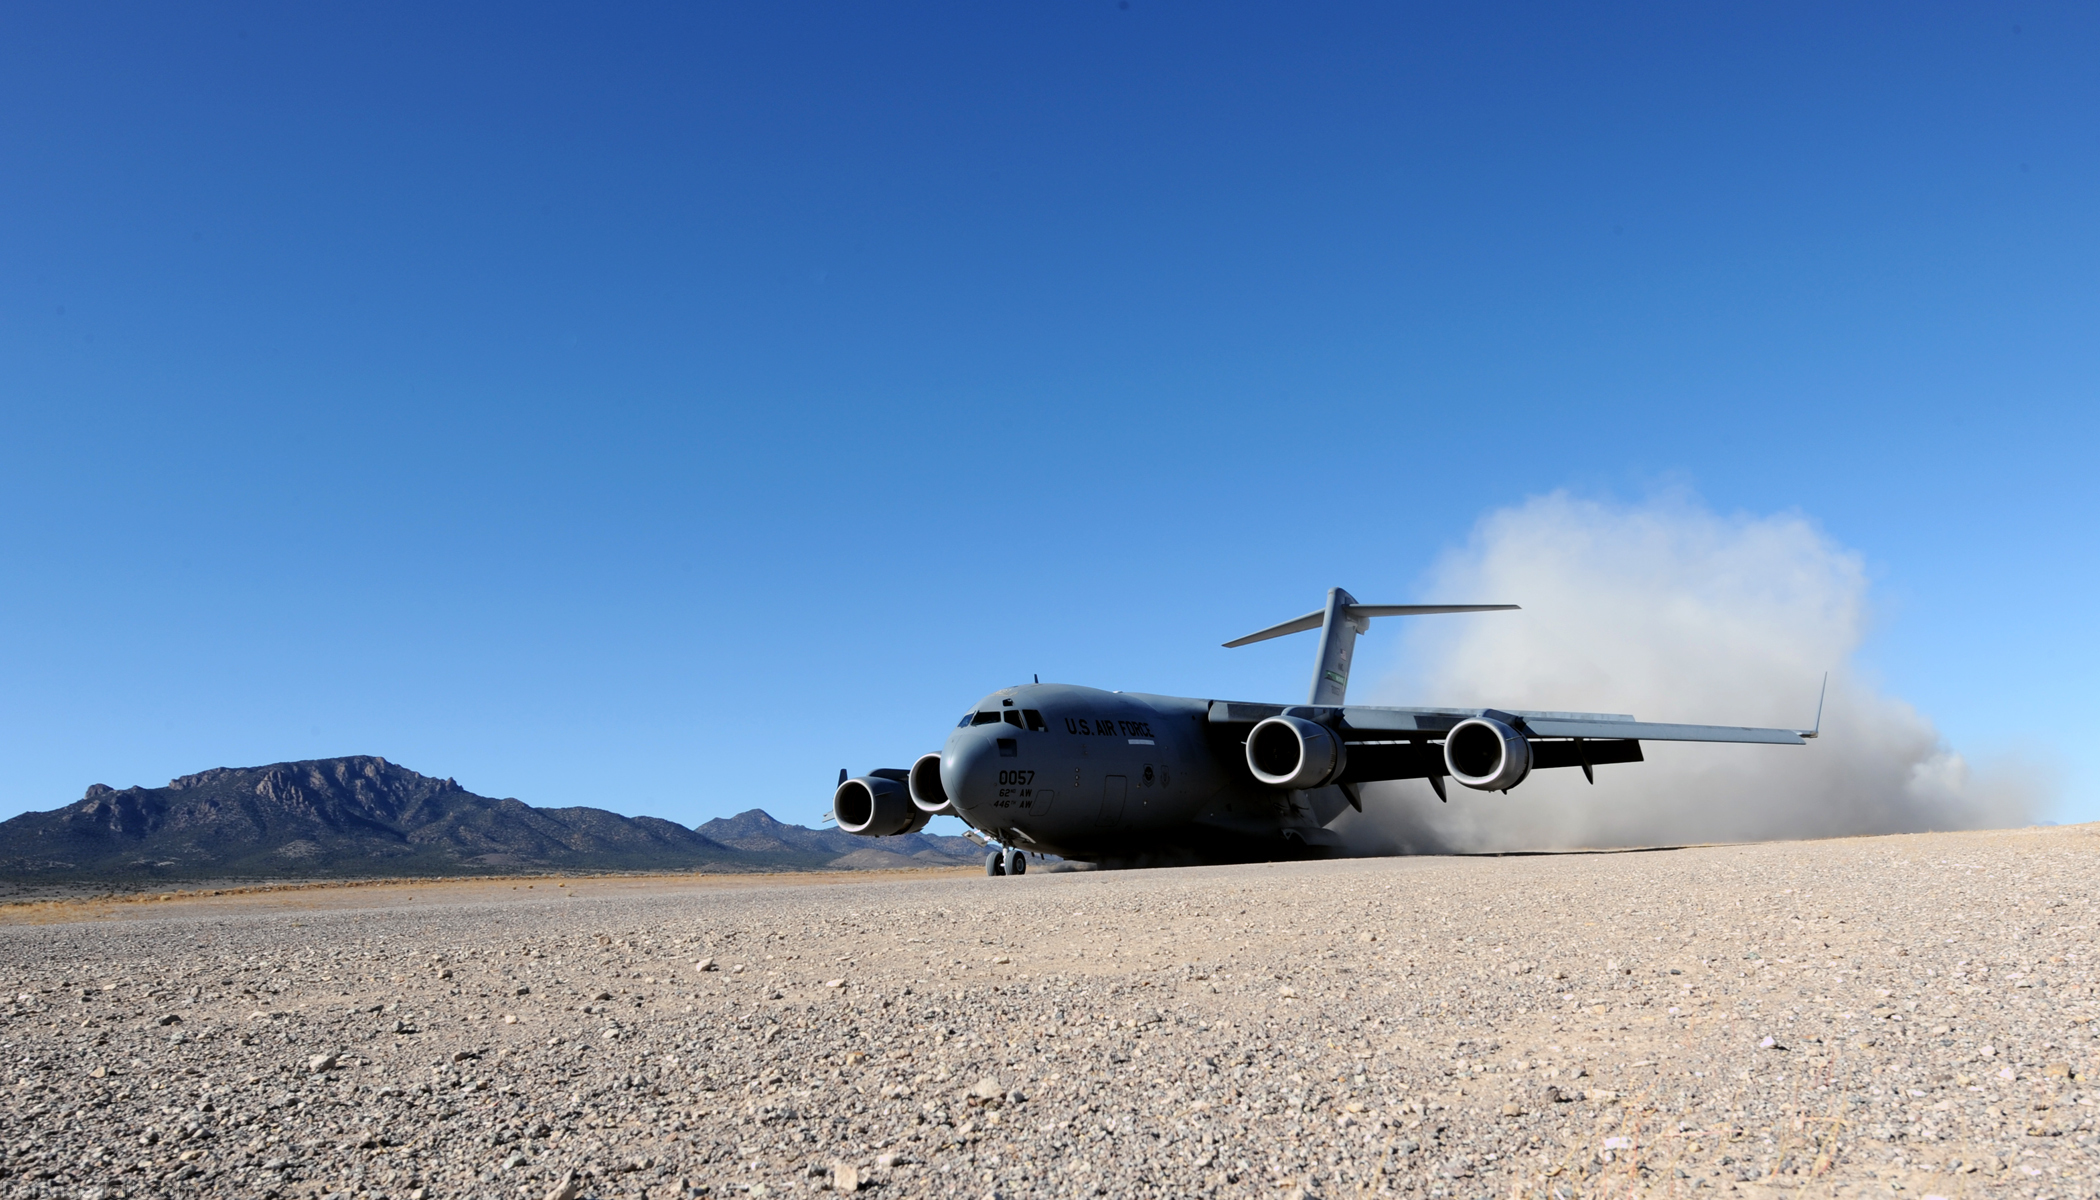 C-17 Globemaster III lands - Mobility Air Forces Exercise